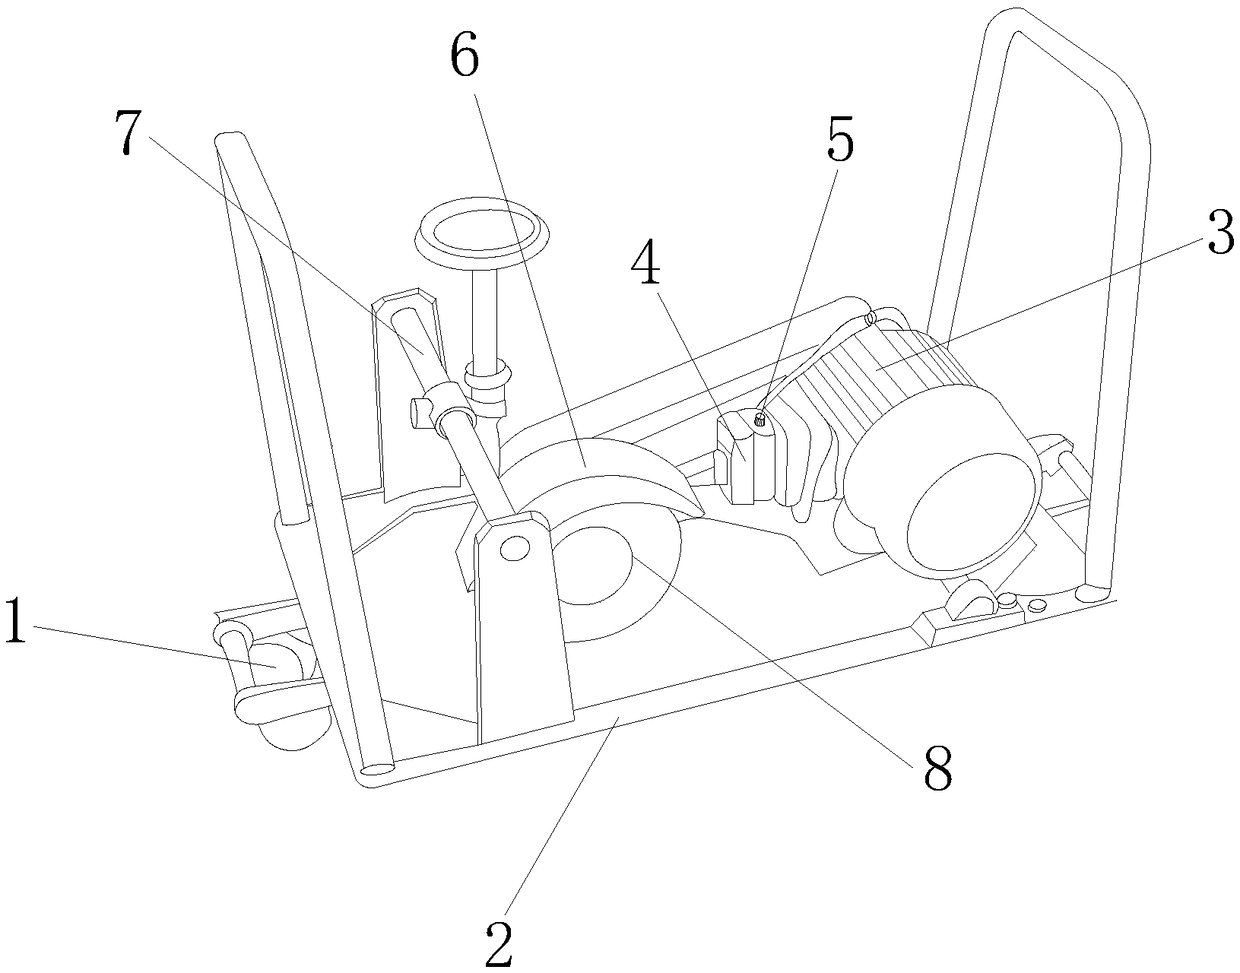 End-face grinding device for air intake and exhaust valves of internal combustion engines